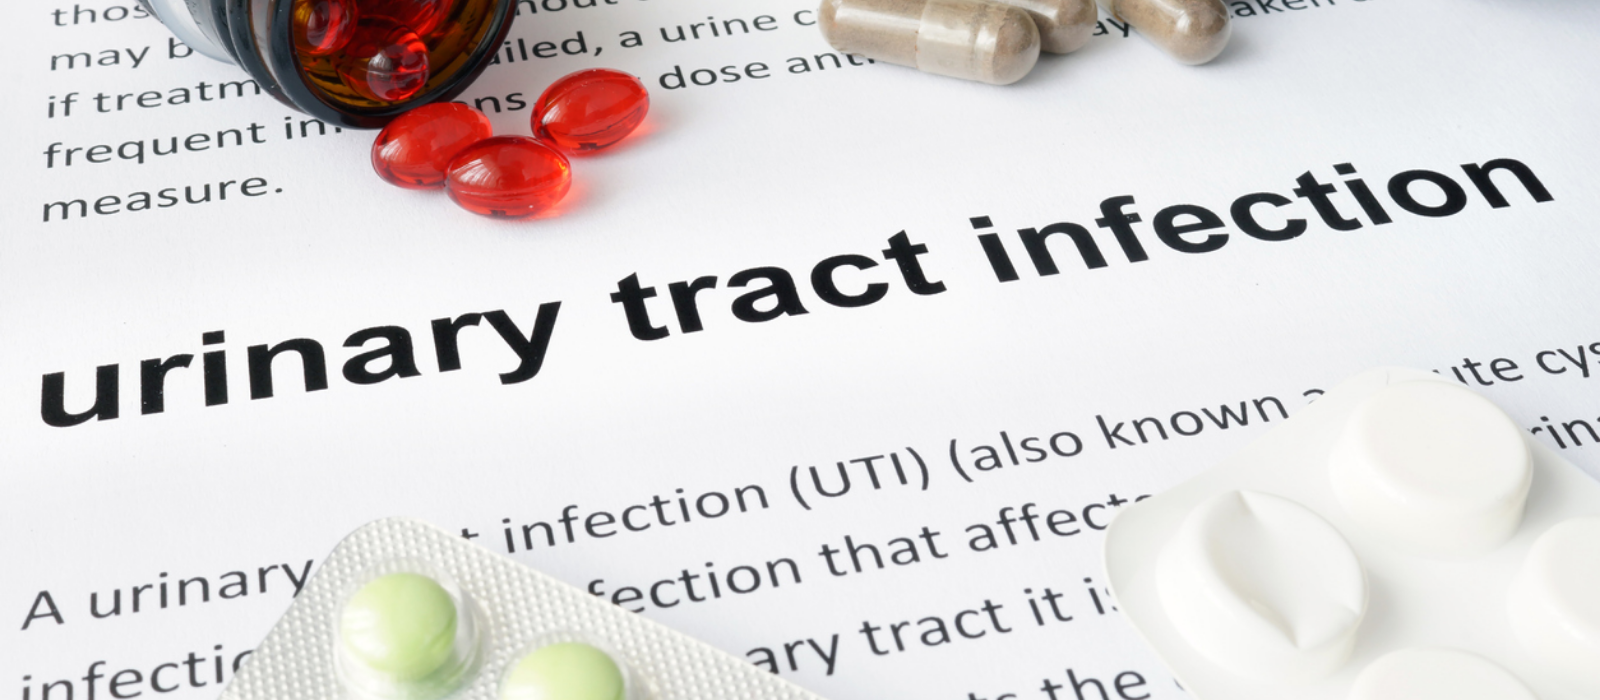 An image of text which reads "urinary tract infection" and various pills covering up other text.